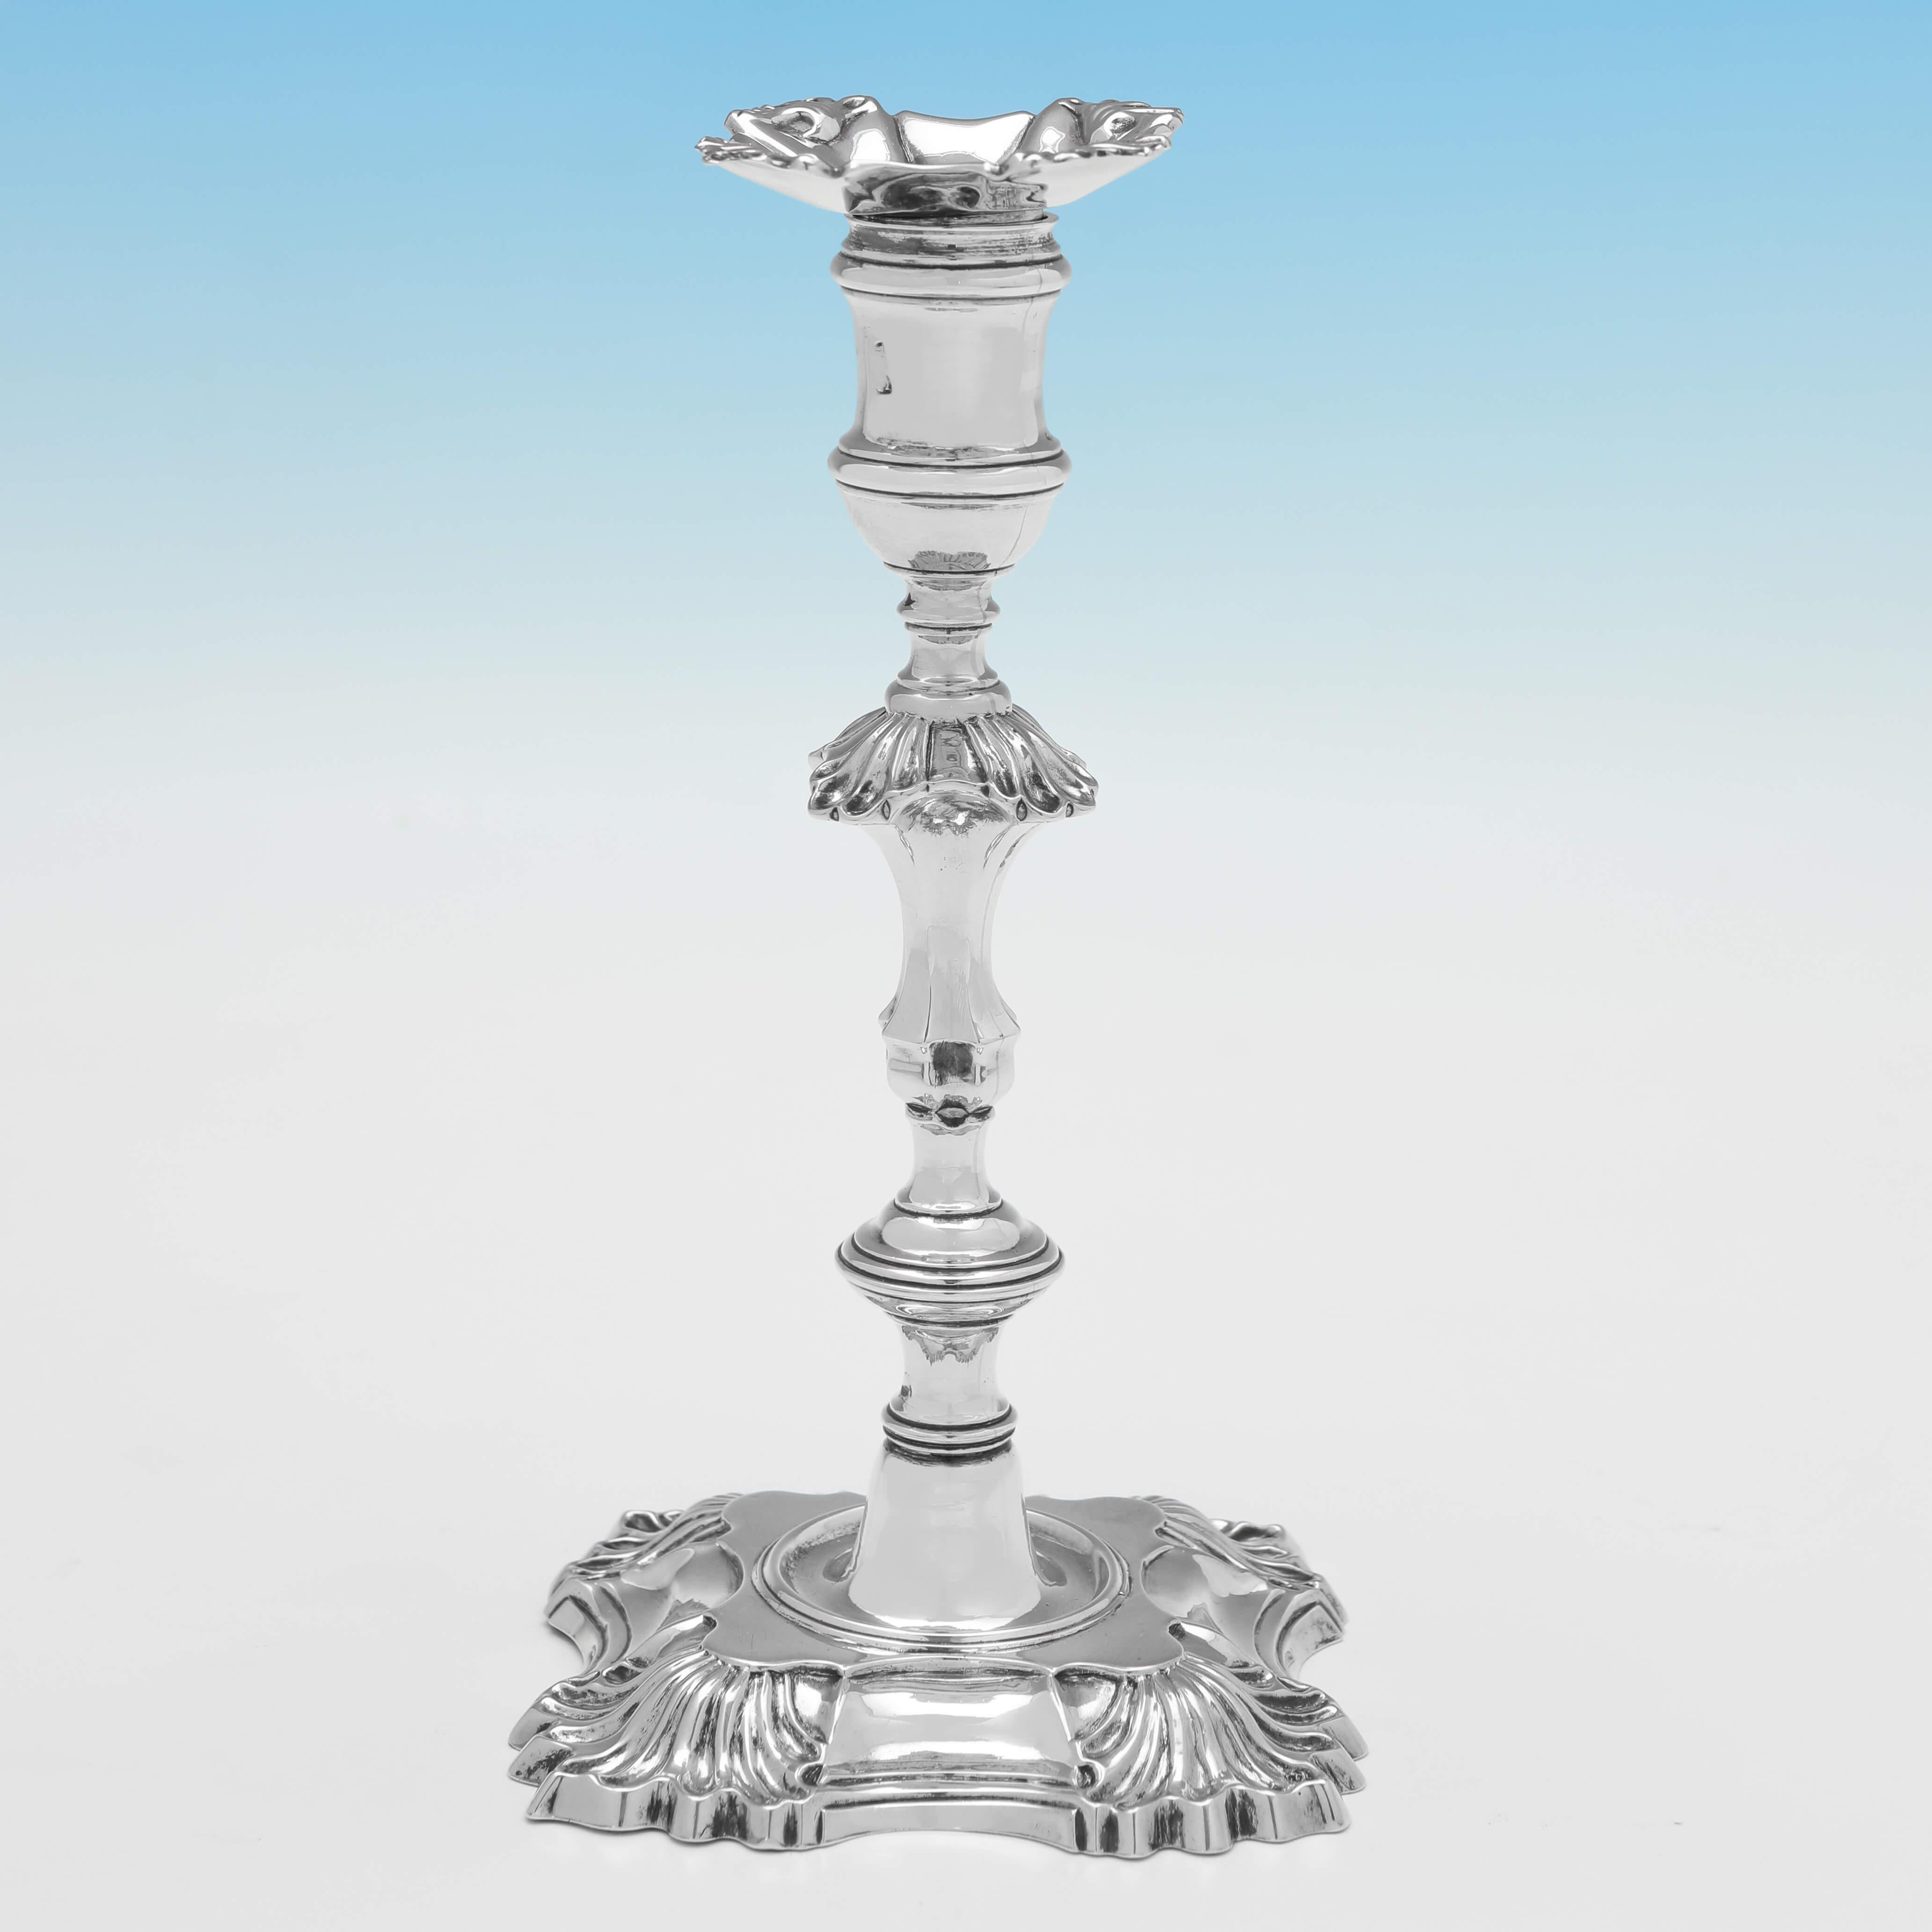 Hallmarked in London in 1751 by William Gould, this charming pair of George II period, cast, Antique Sterling Silver Candlesticks, are in the '4 Shell' style, and feature removable nozzles. 

Each candlestick measures 8